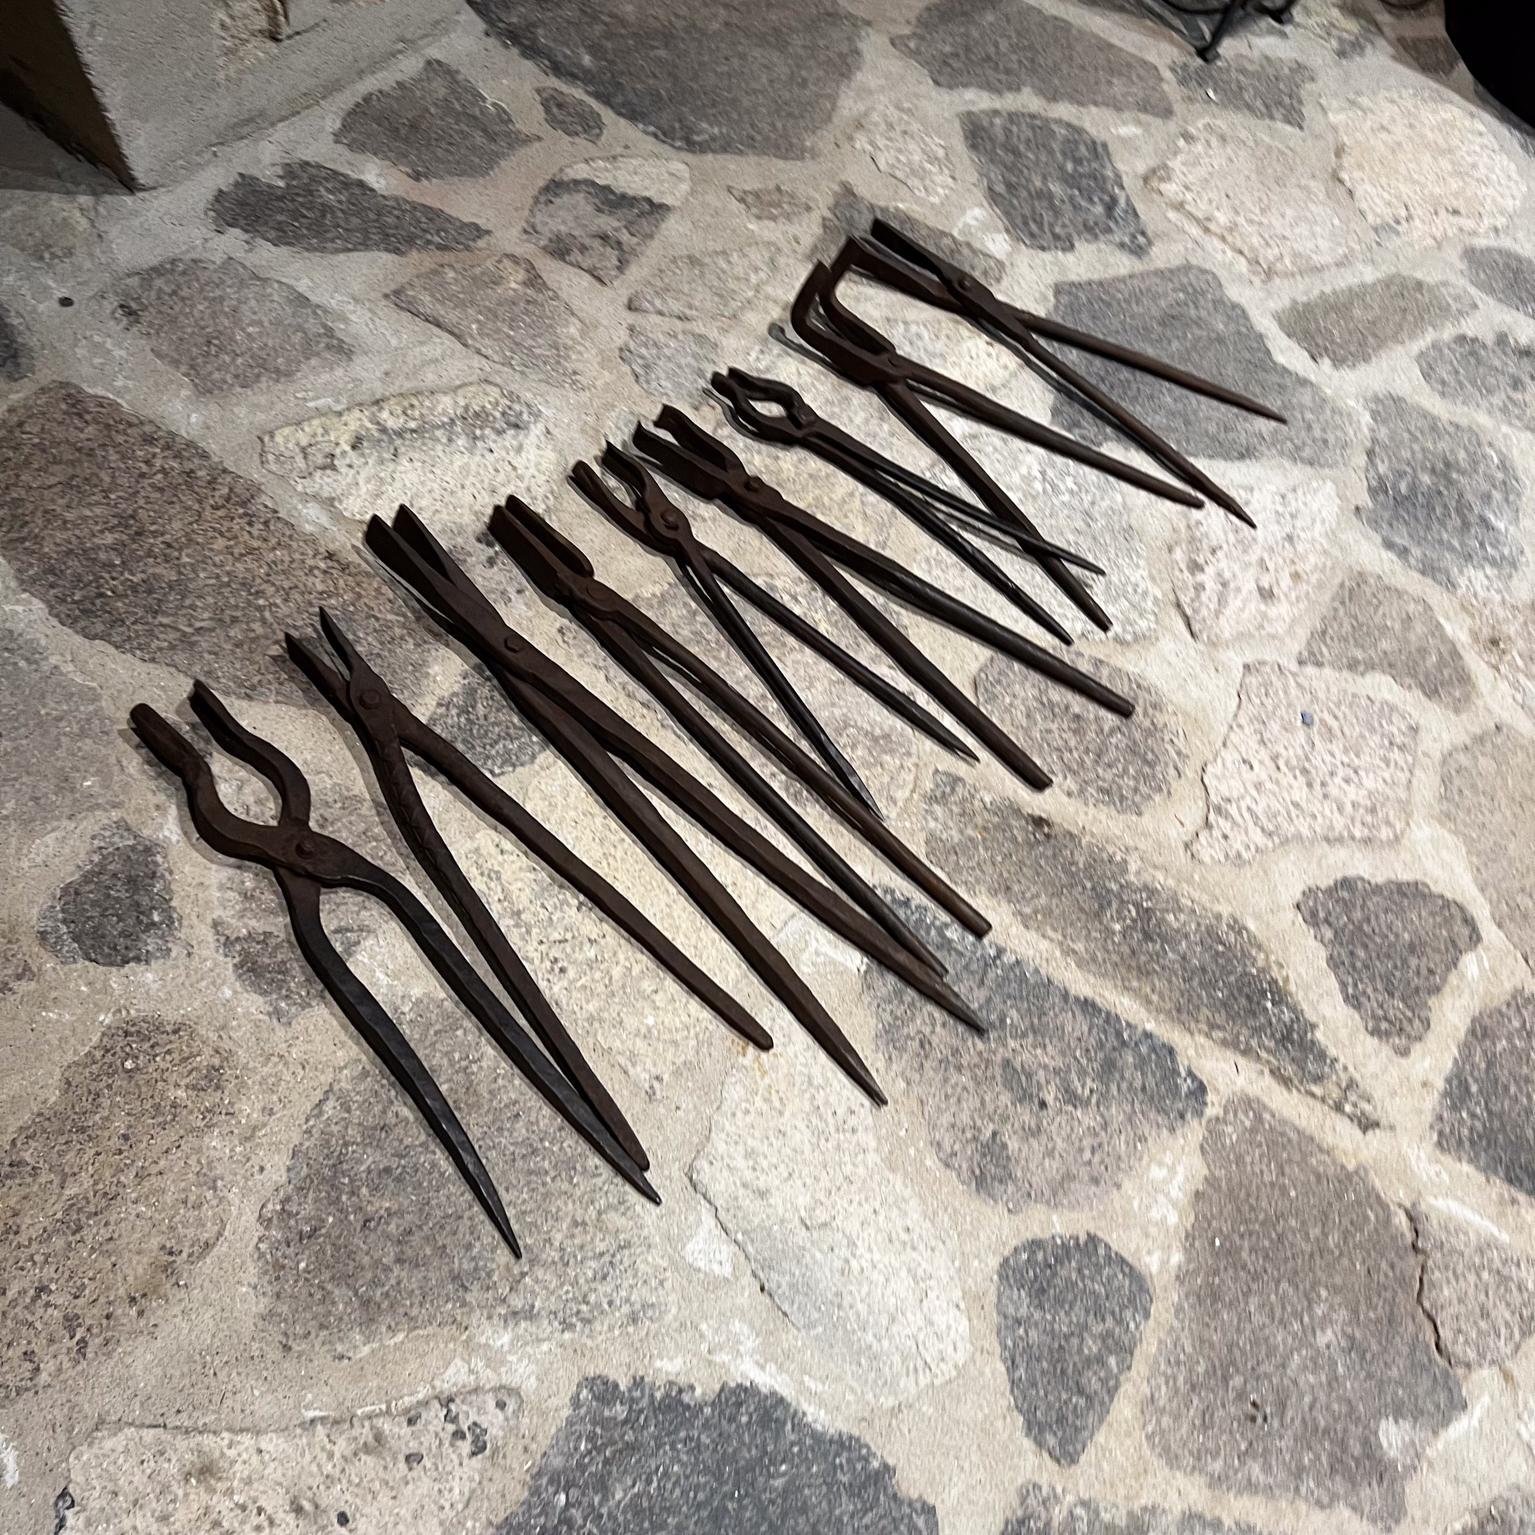  Antique Iron Worker Hand Forged Vintage Tools Set of 9 For Sale 1